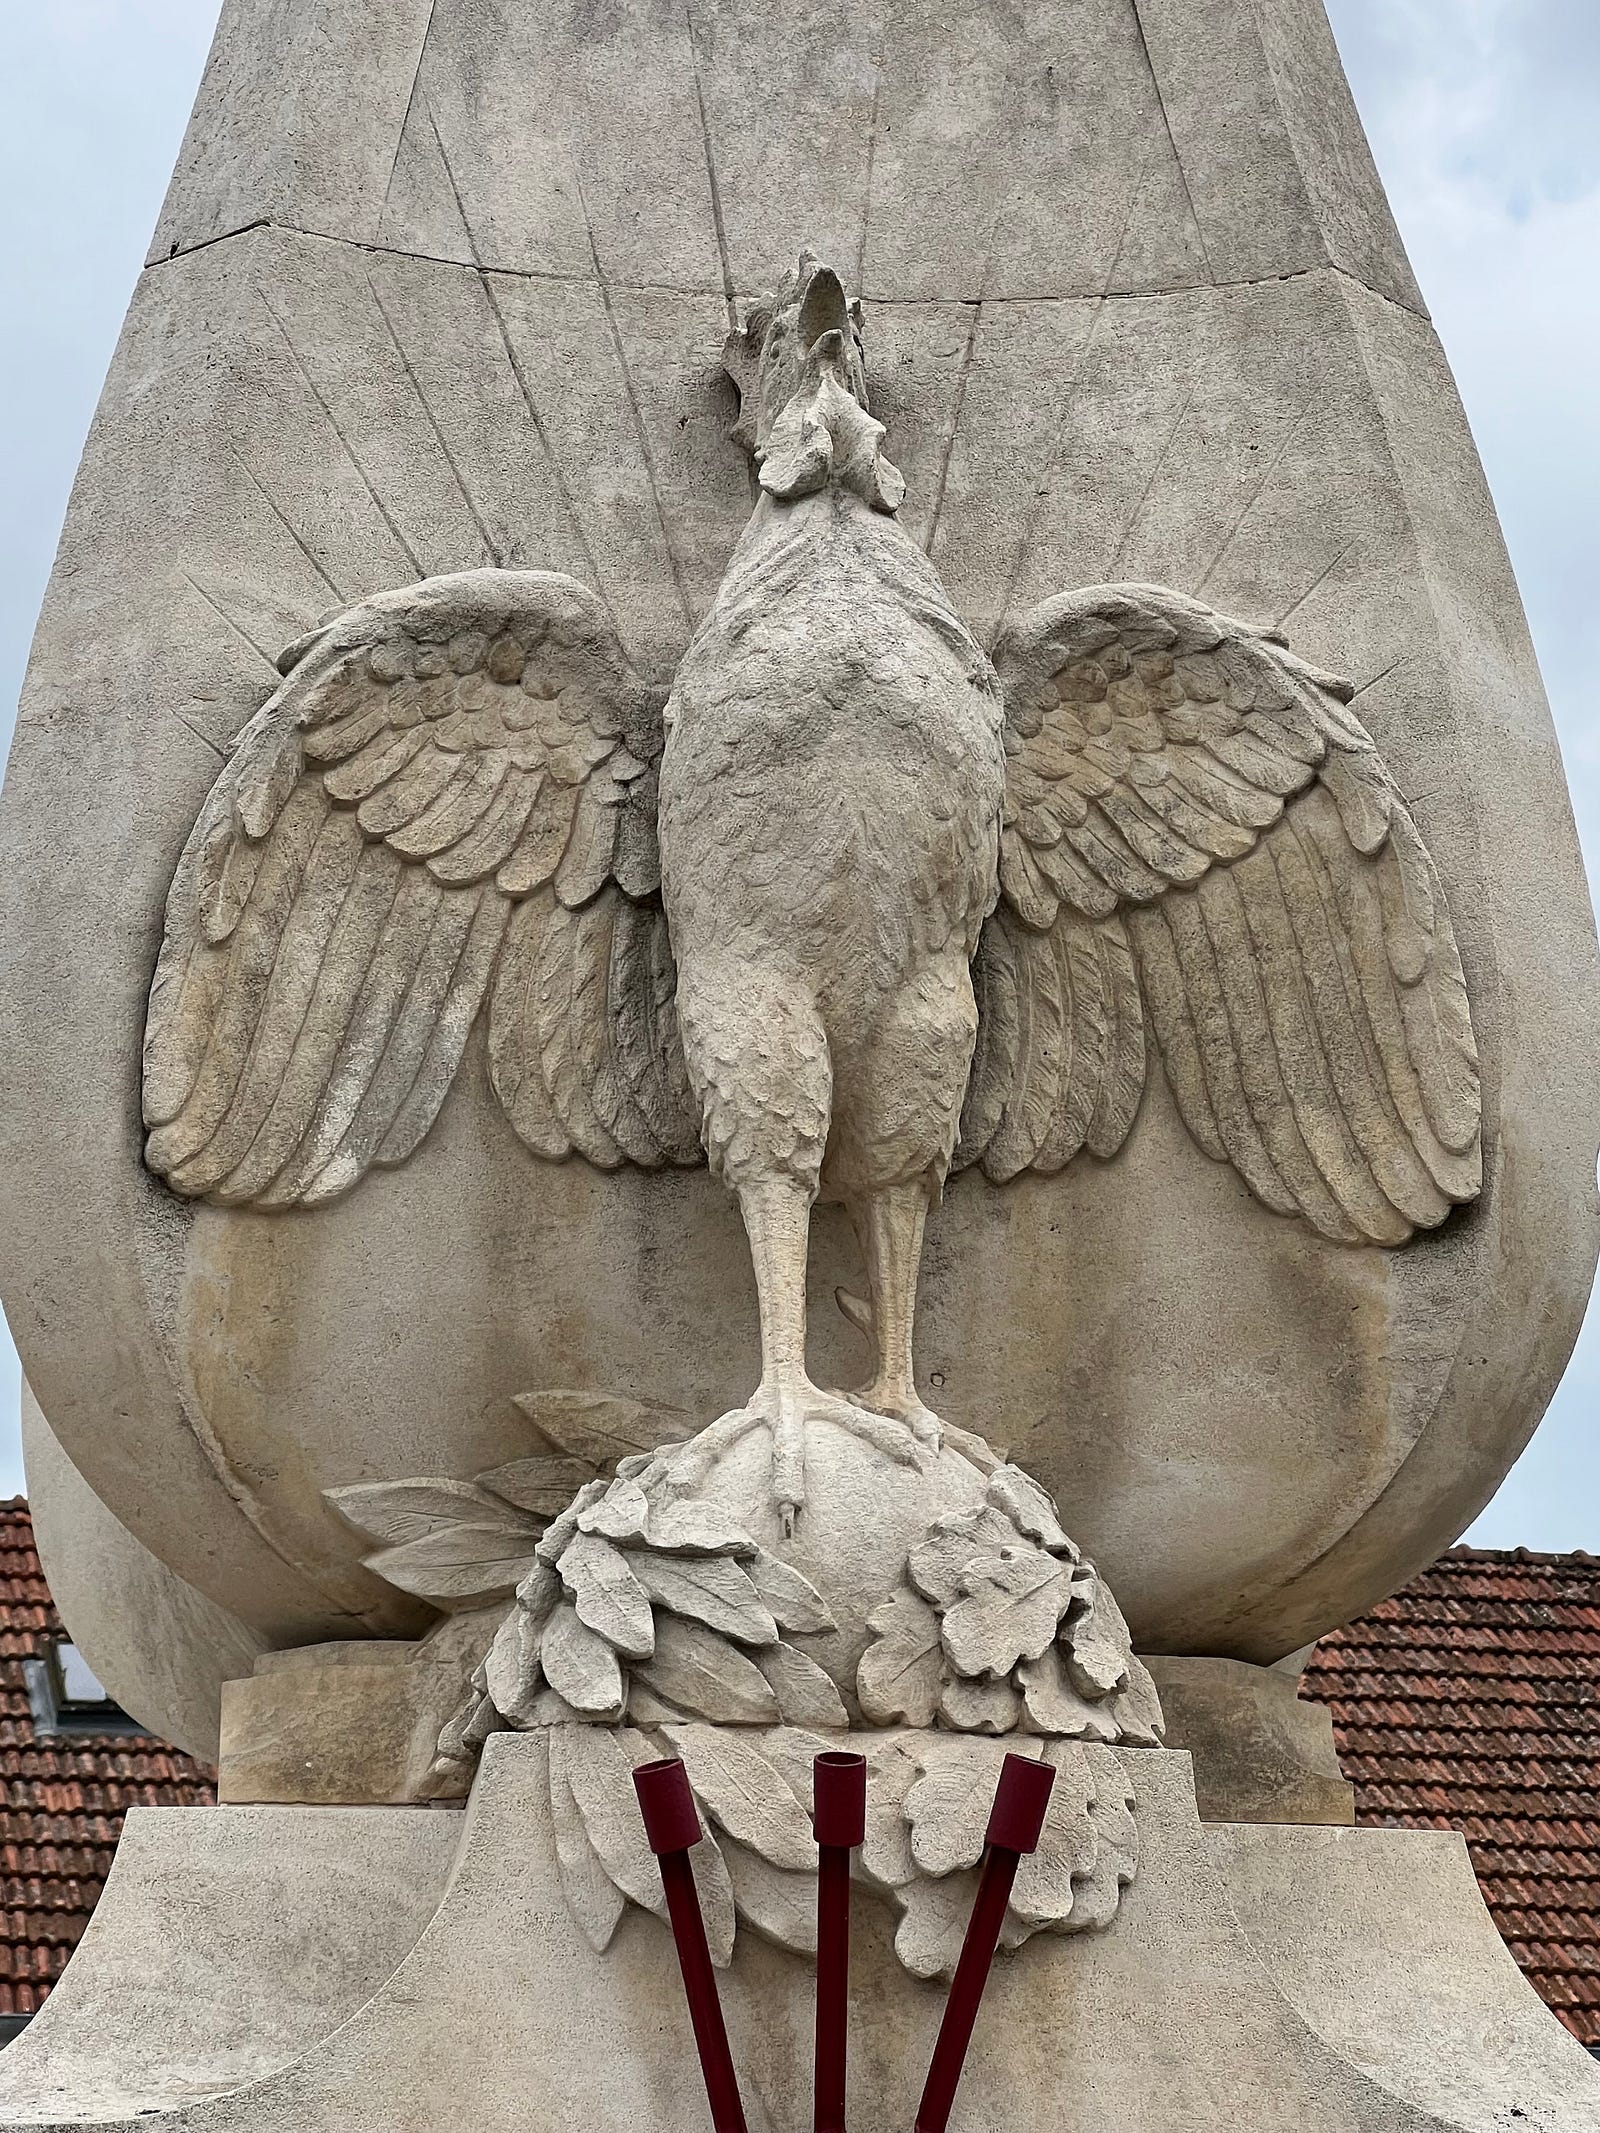 Photo of the war memorial in Andelot, France featuring a crowing rooster.